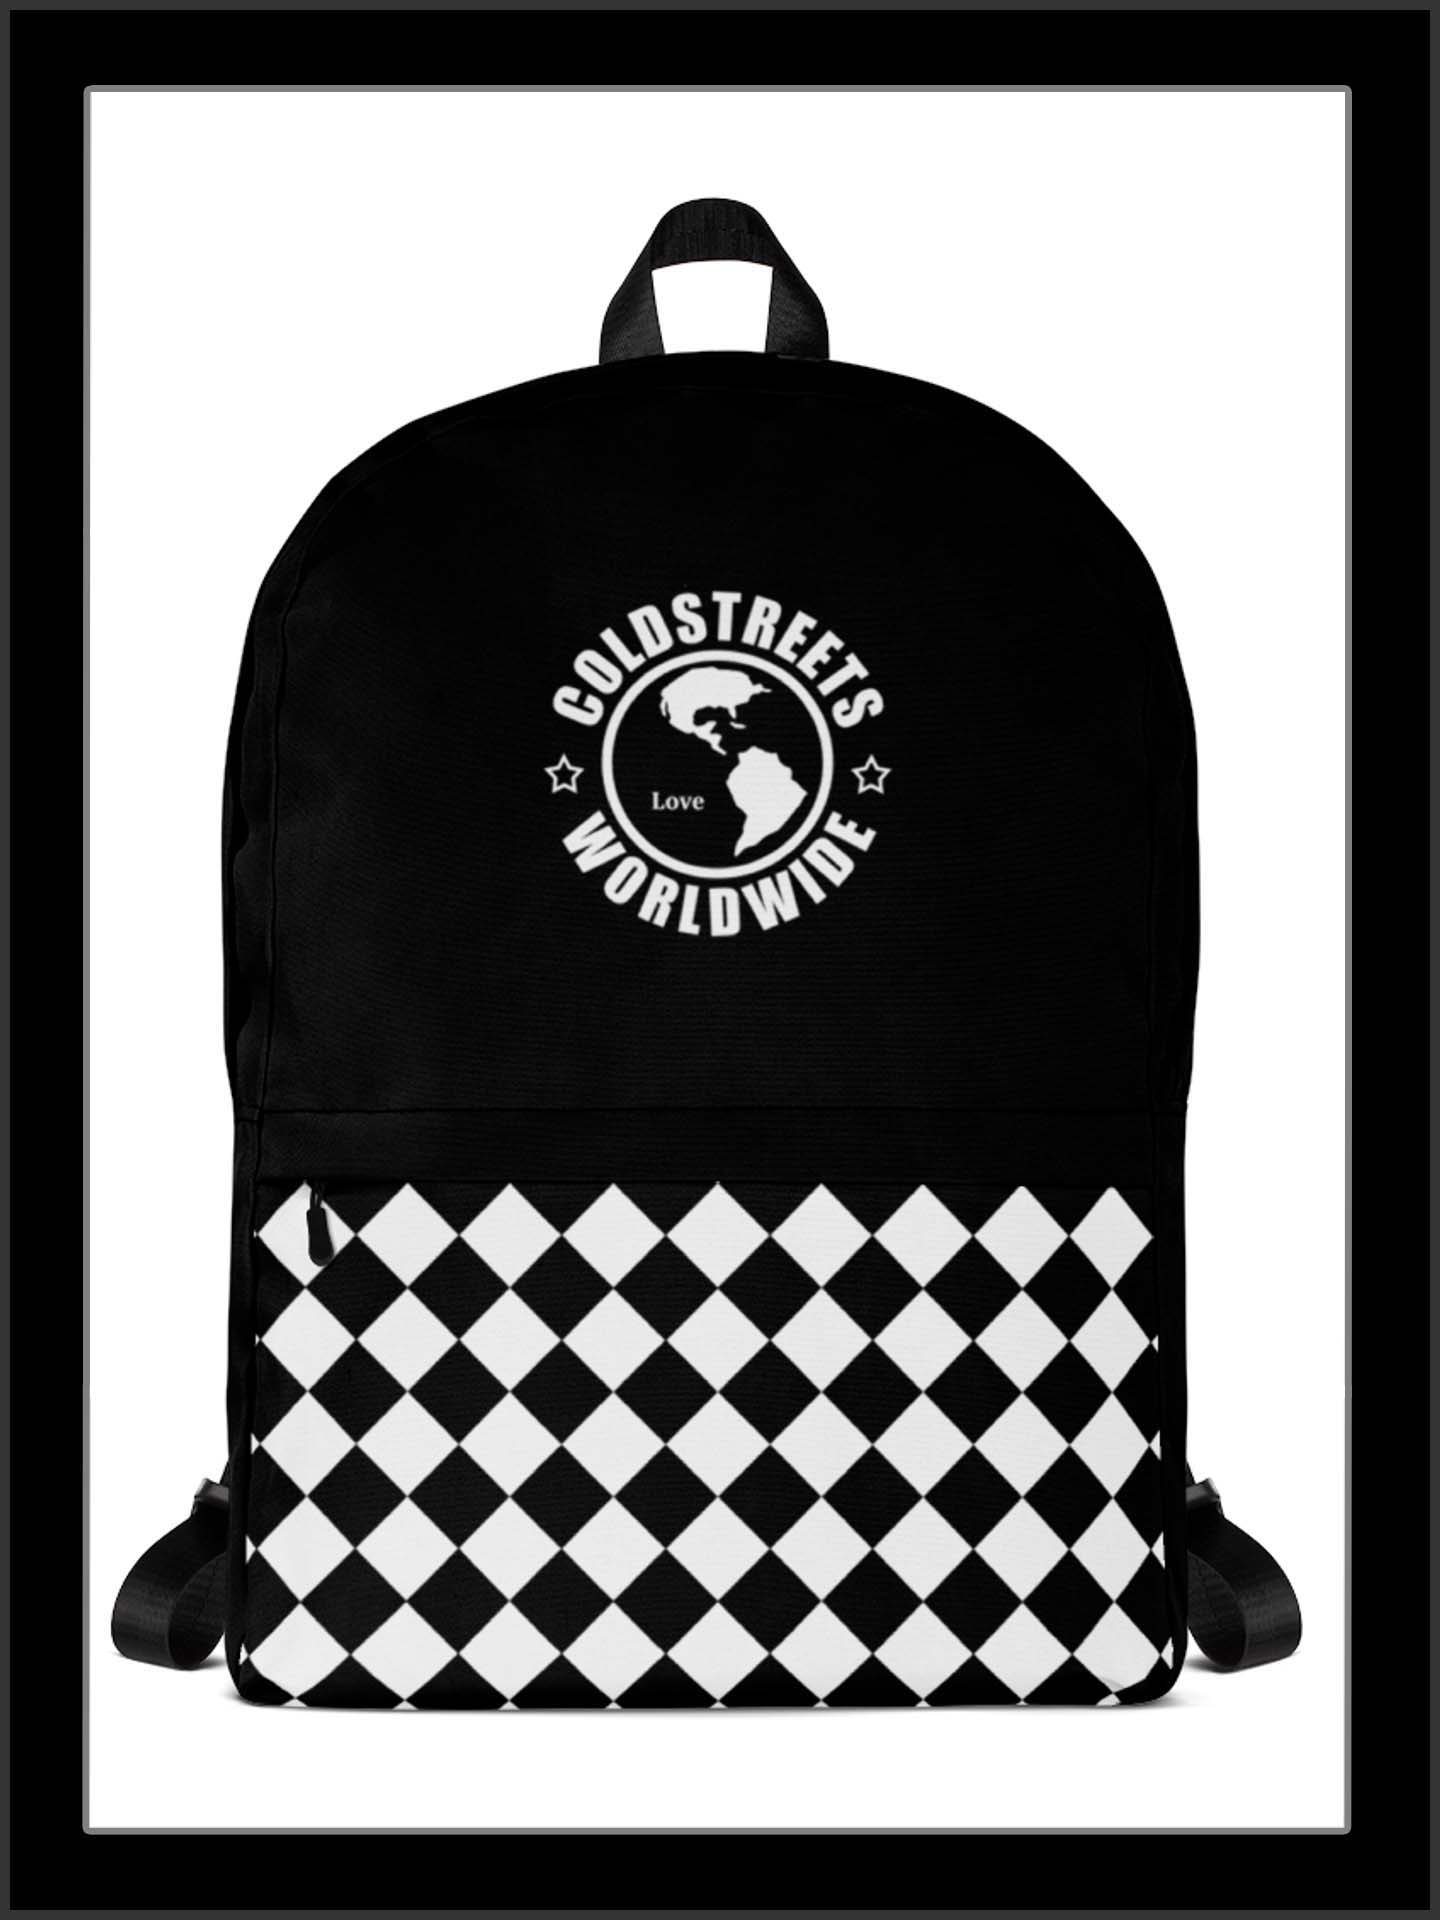 Cold Streets New Mexico Backpacks